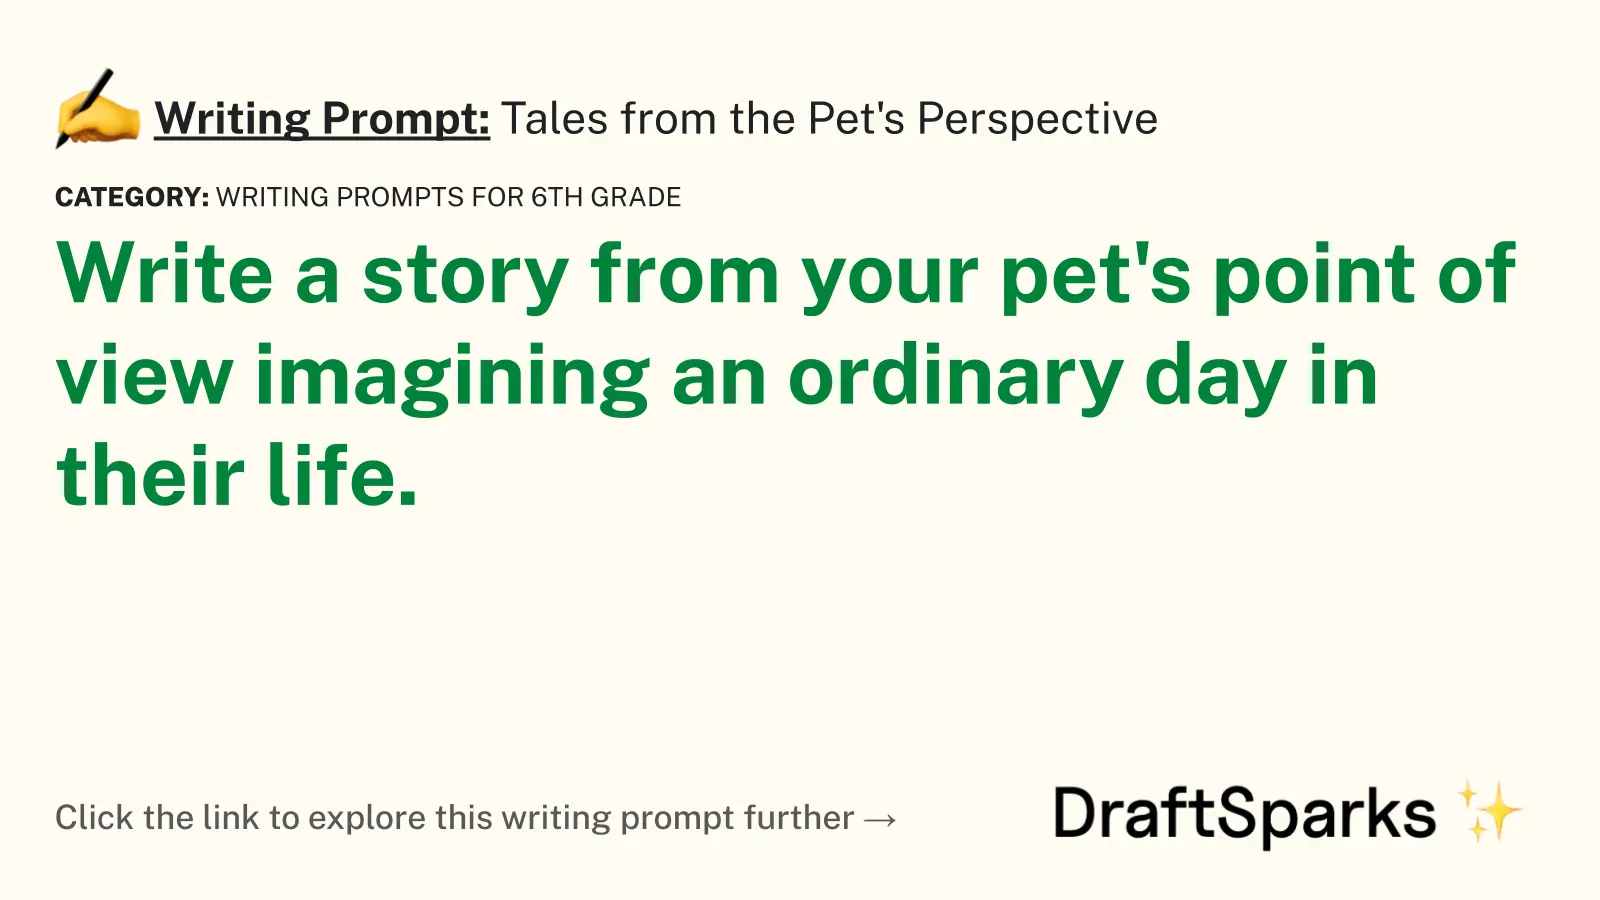 Tales from the Pet’s Perspective